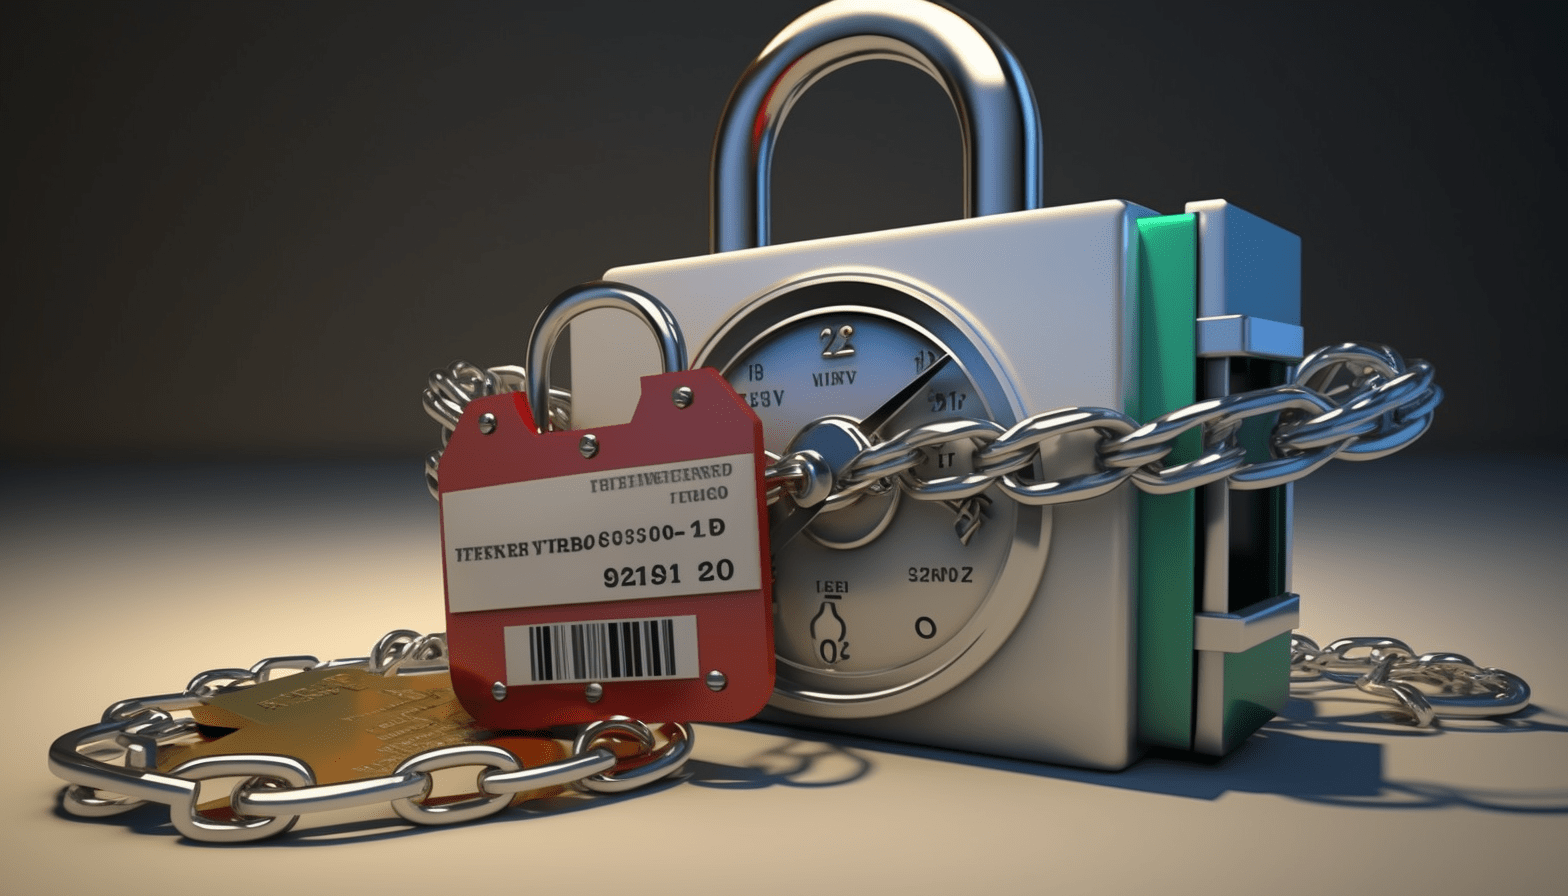 A lock with a chain wrapped around a credit score report, symbolizing the protection and security that freezing your credit provides against identity theft and fraud